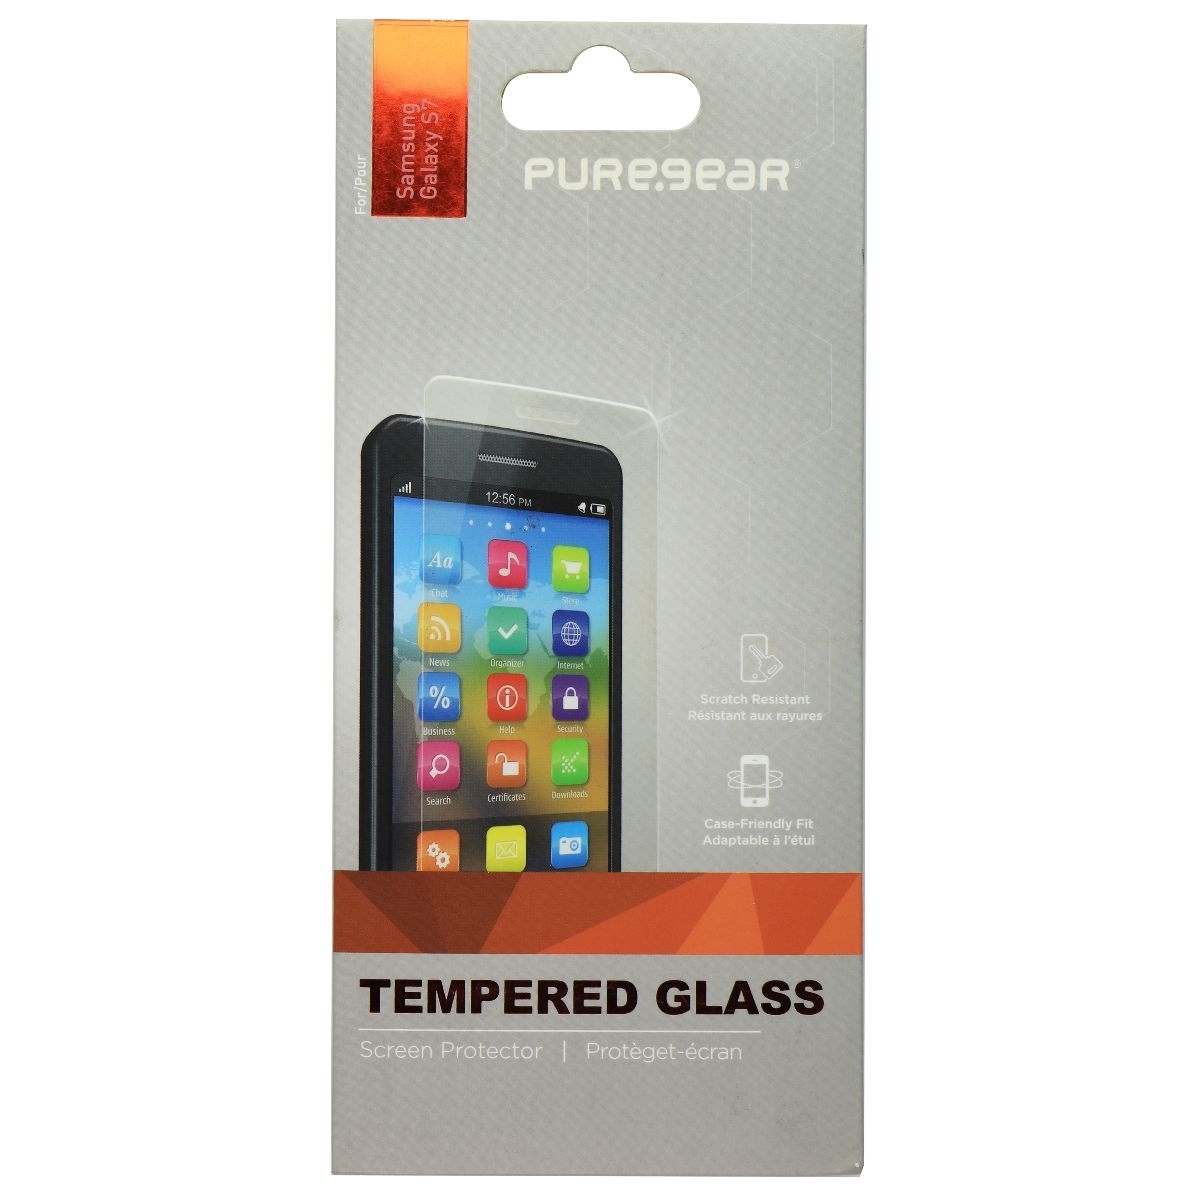 PureGear Tempered Glass Screen Protector For Samsung Galaxy S7 (2016 Model) (Refurbished)